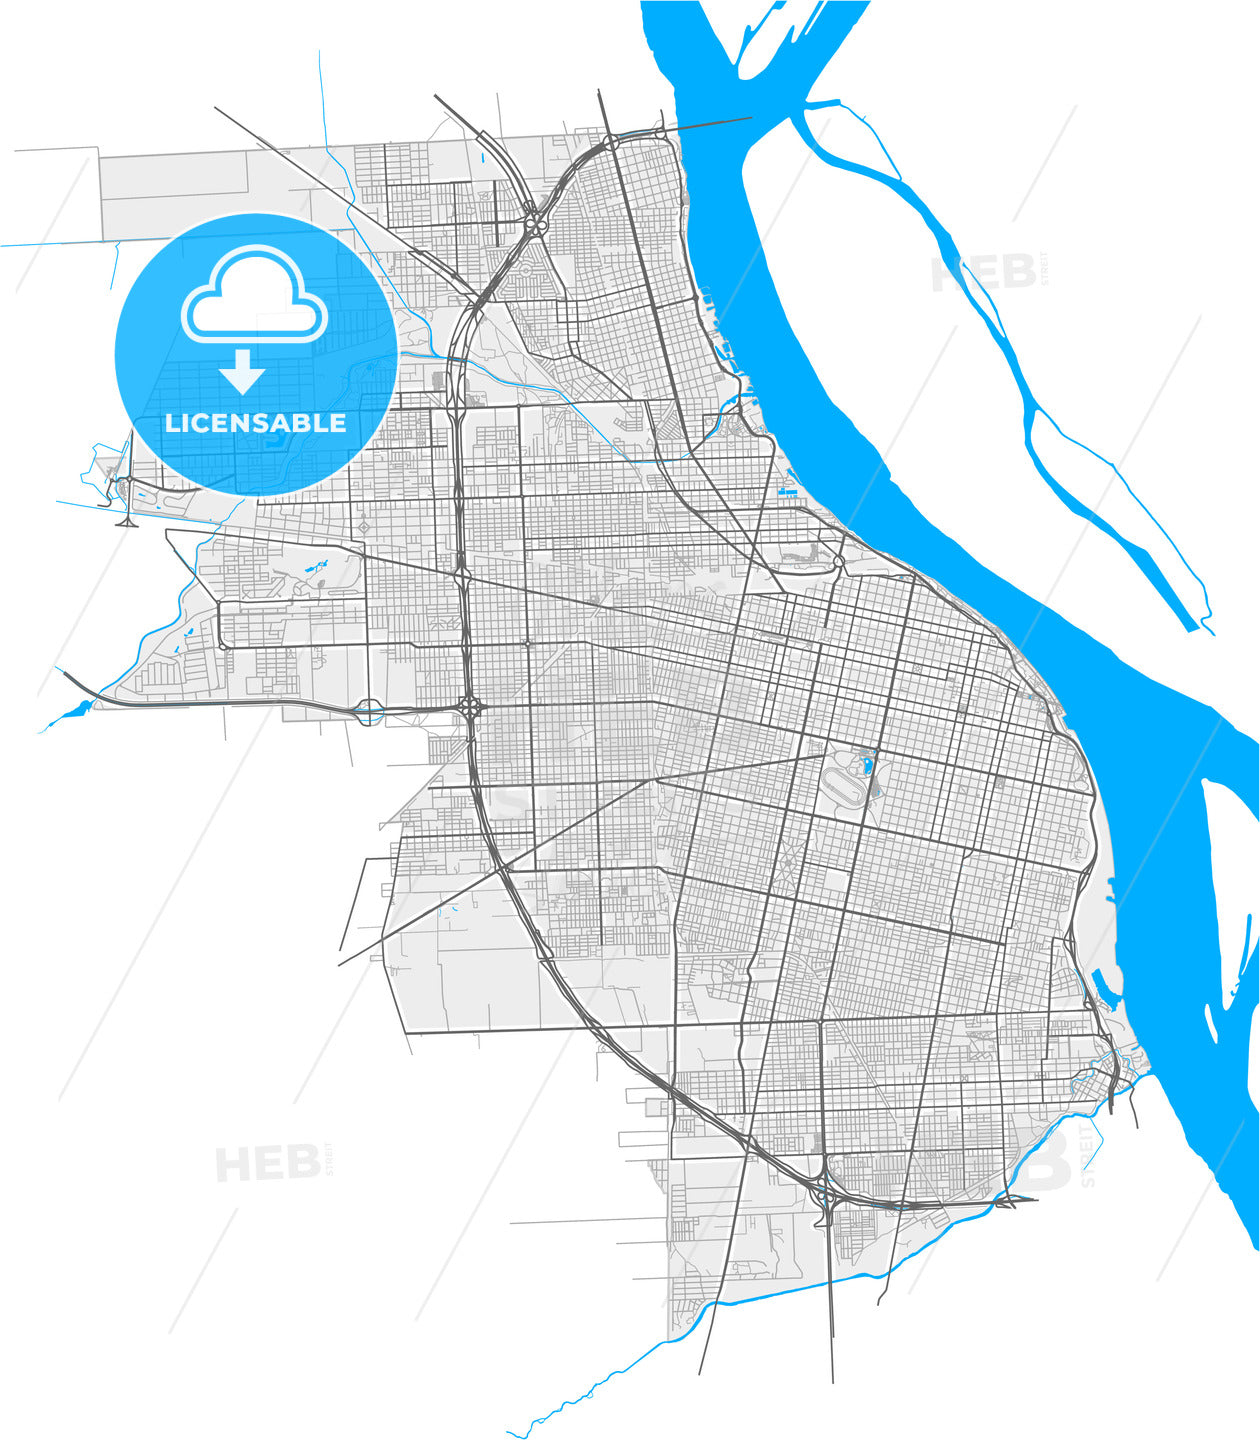 Rosario, Argentina, high quality vector map